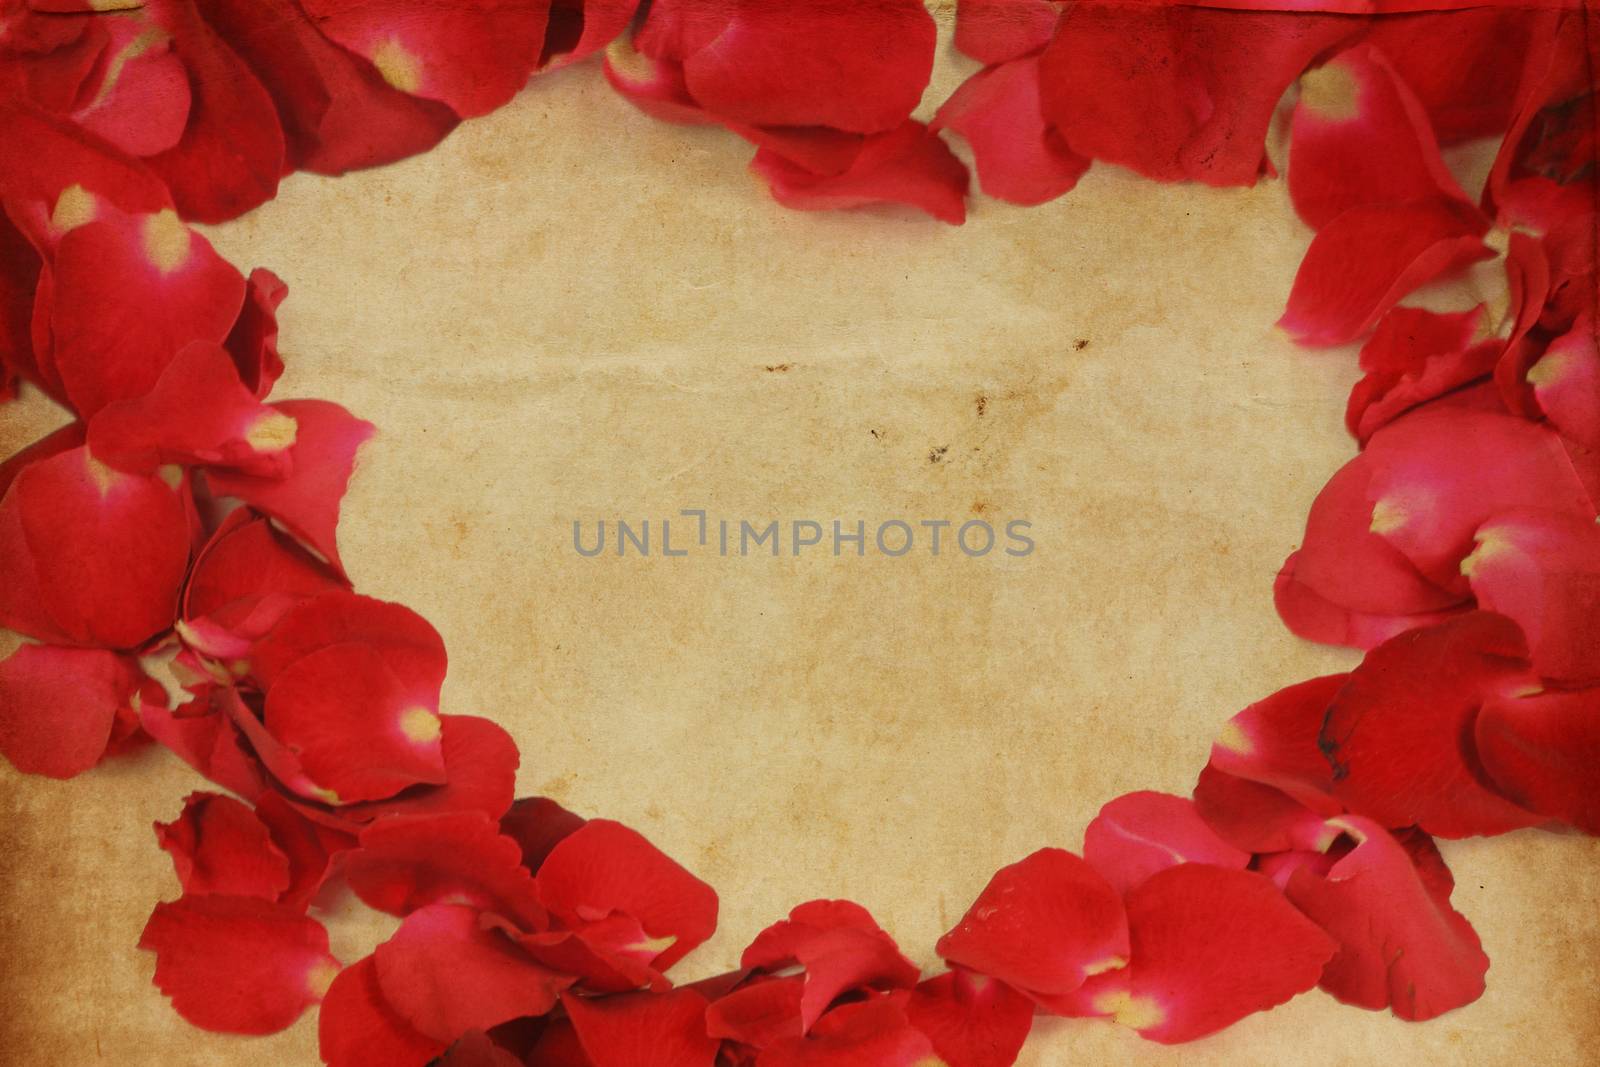 Vintage romantic background with roses petals by wyoosumran